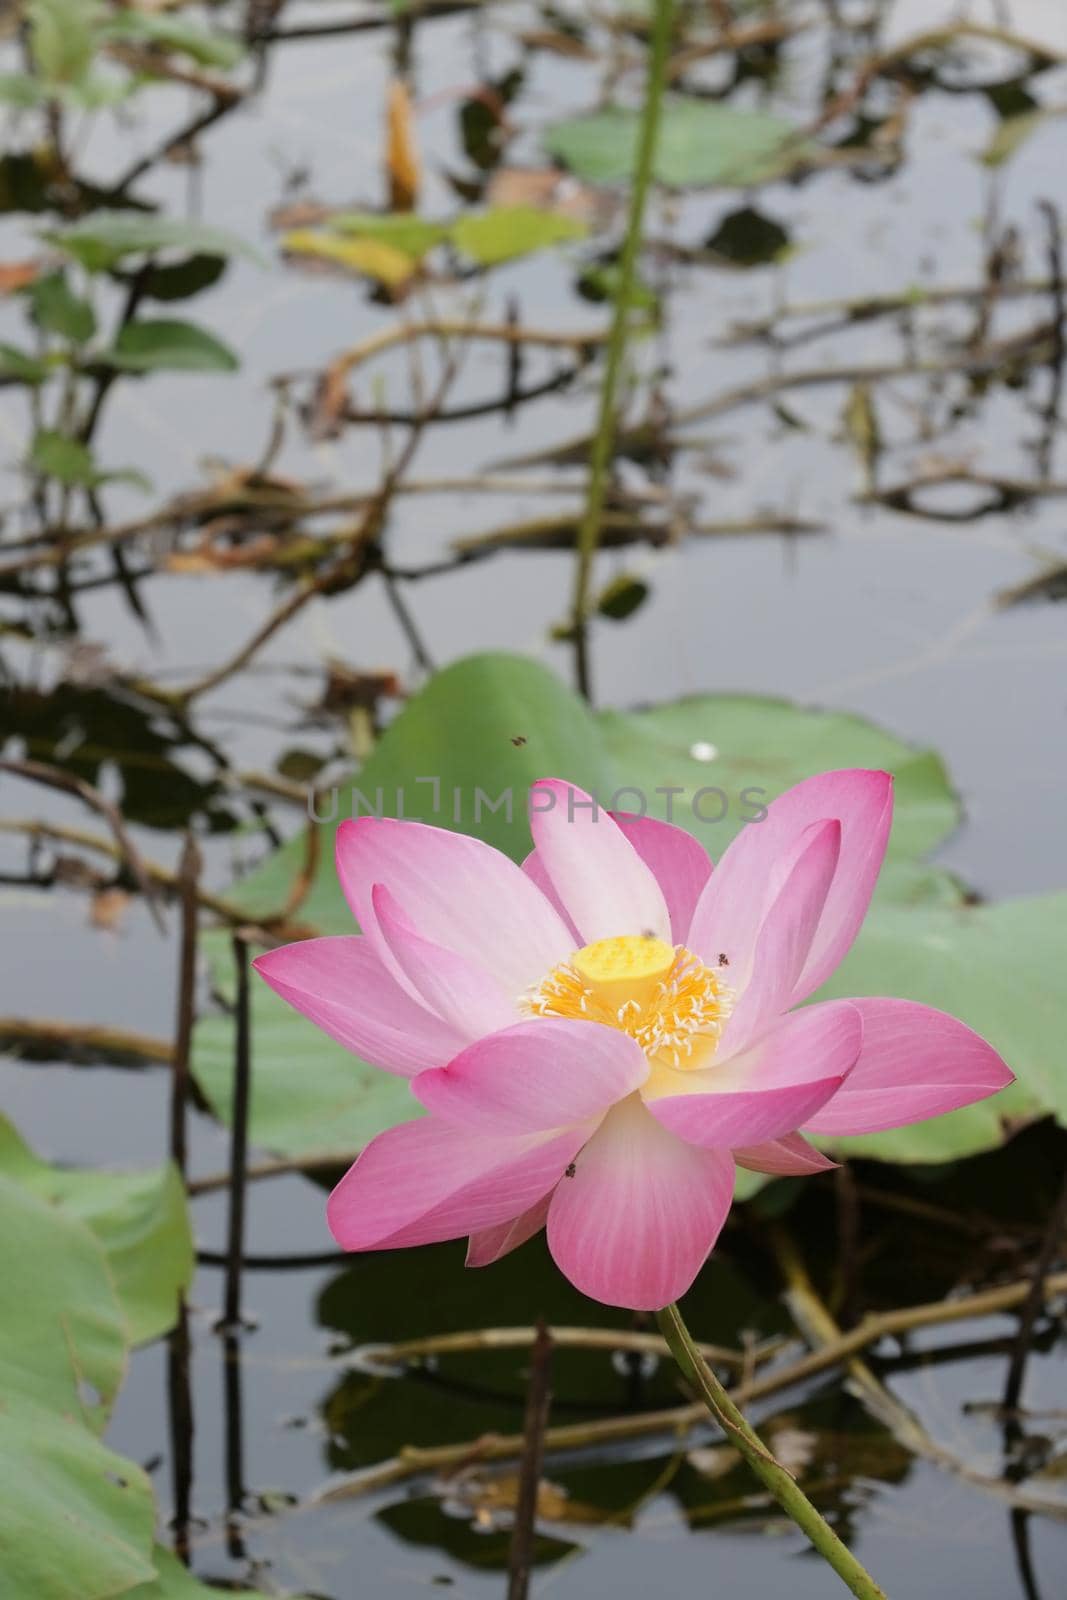 The big lotus is a food source for many insects. and is a Buddhist religious flower or to show respect in many traditional ceremonies